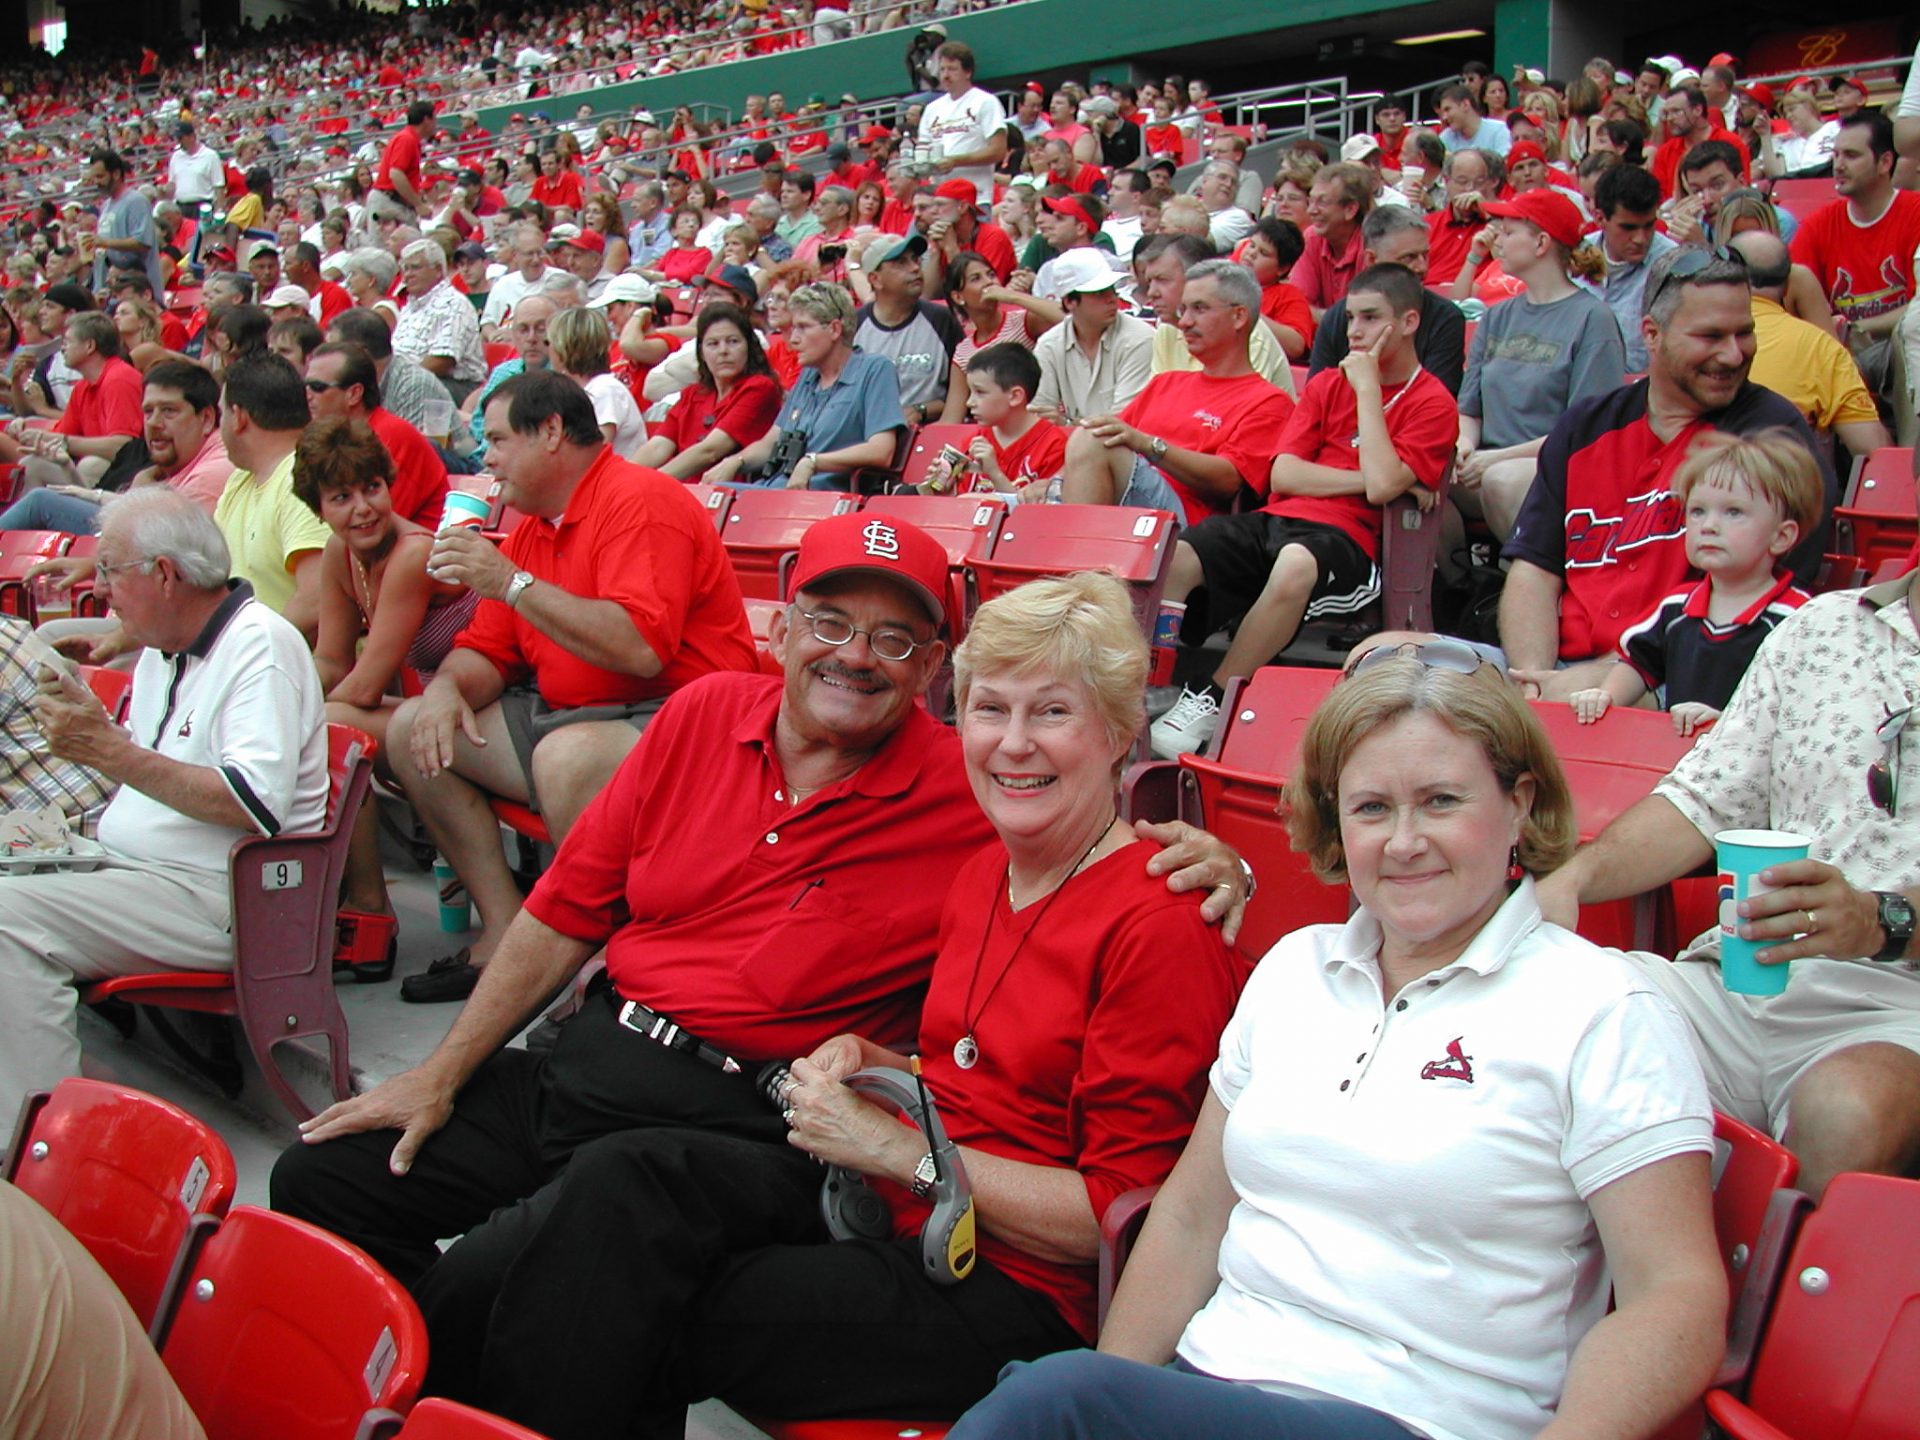 Russ and Darlene attending games in St. Louis with Lynda and Rick Schultz.